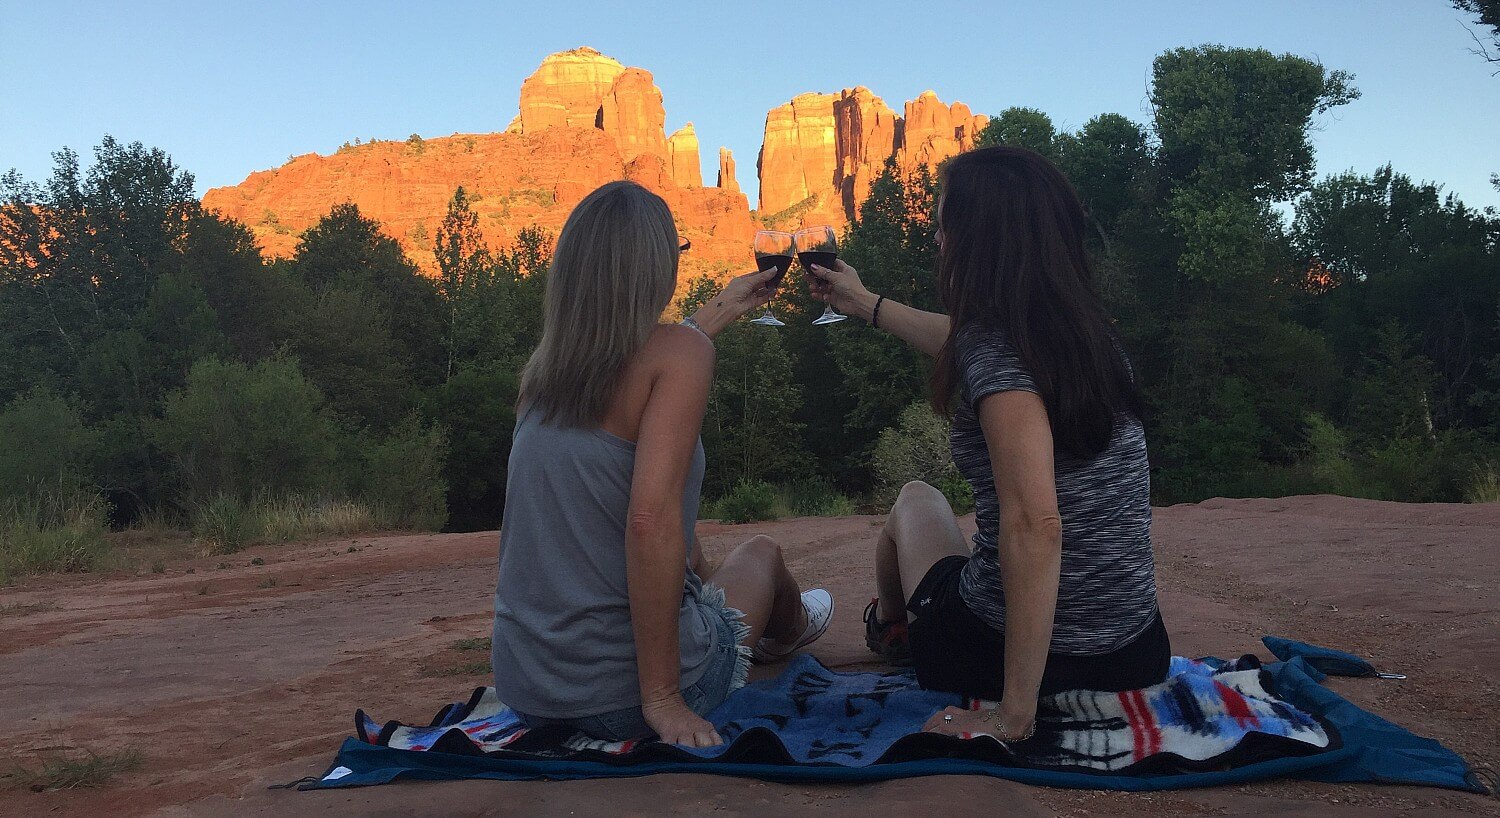 Two girls sitting on a blanket holding up wine glasses and facing tall red rocks shining in the sun